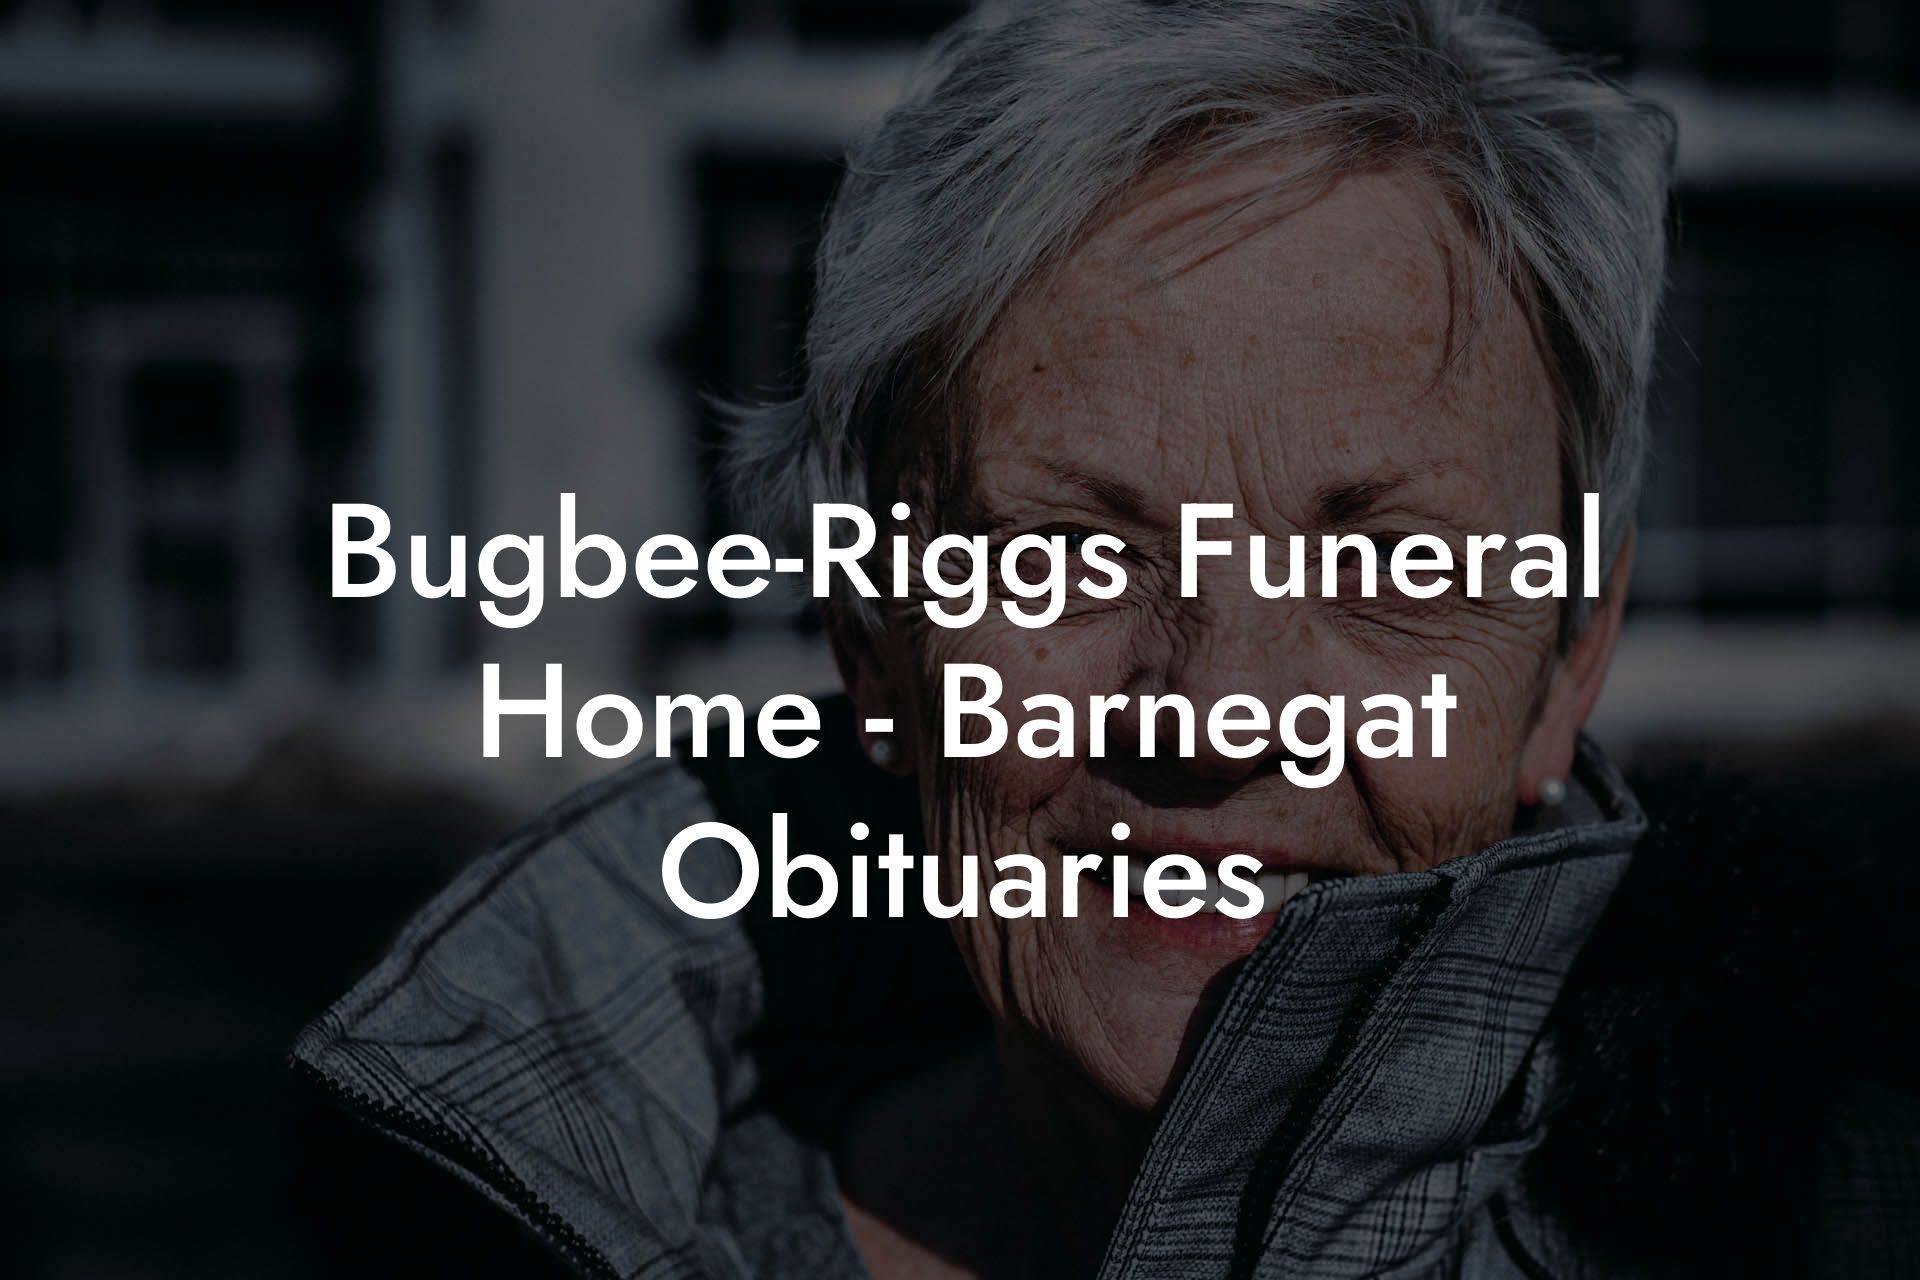 Bugbee-Riggs Funeral Home - Barnegat Obituaries